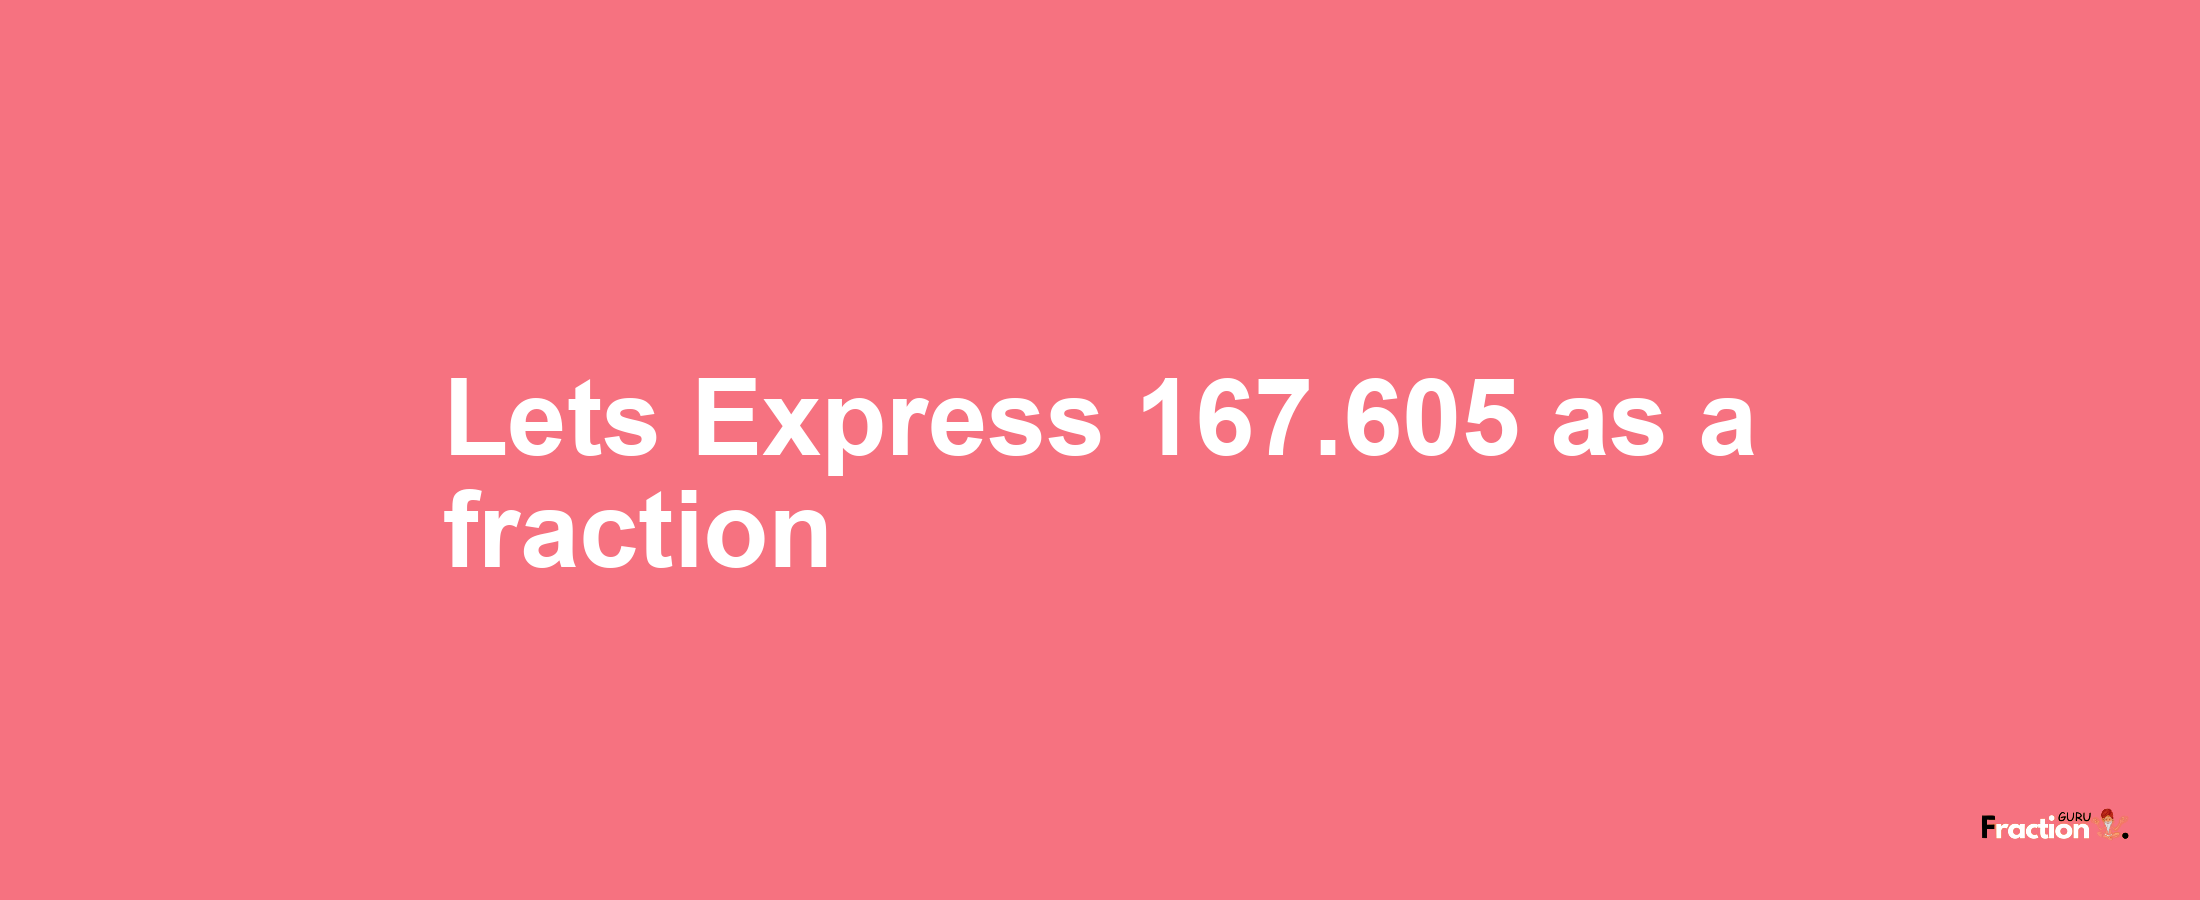 Lets Express 167.605 as afraction